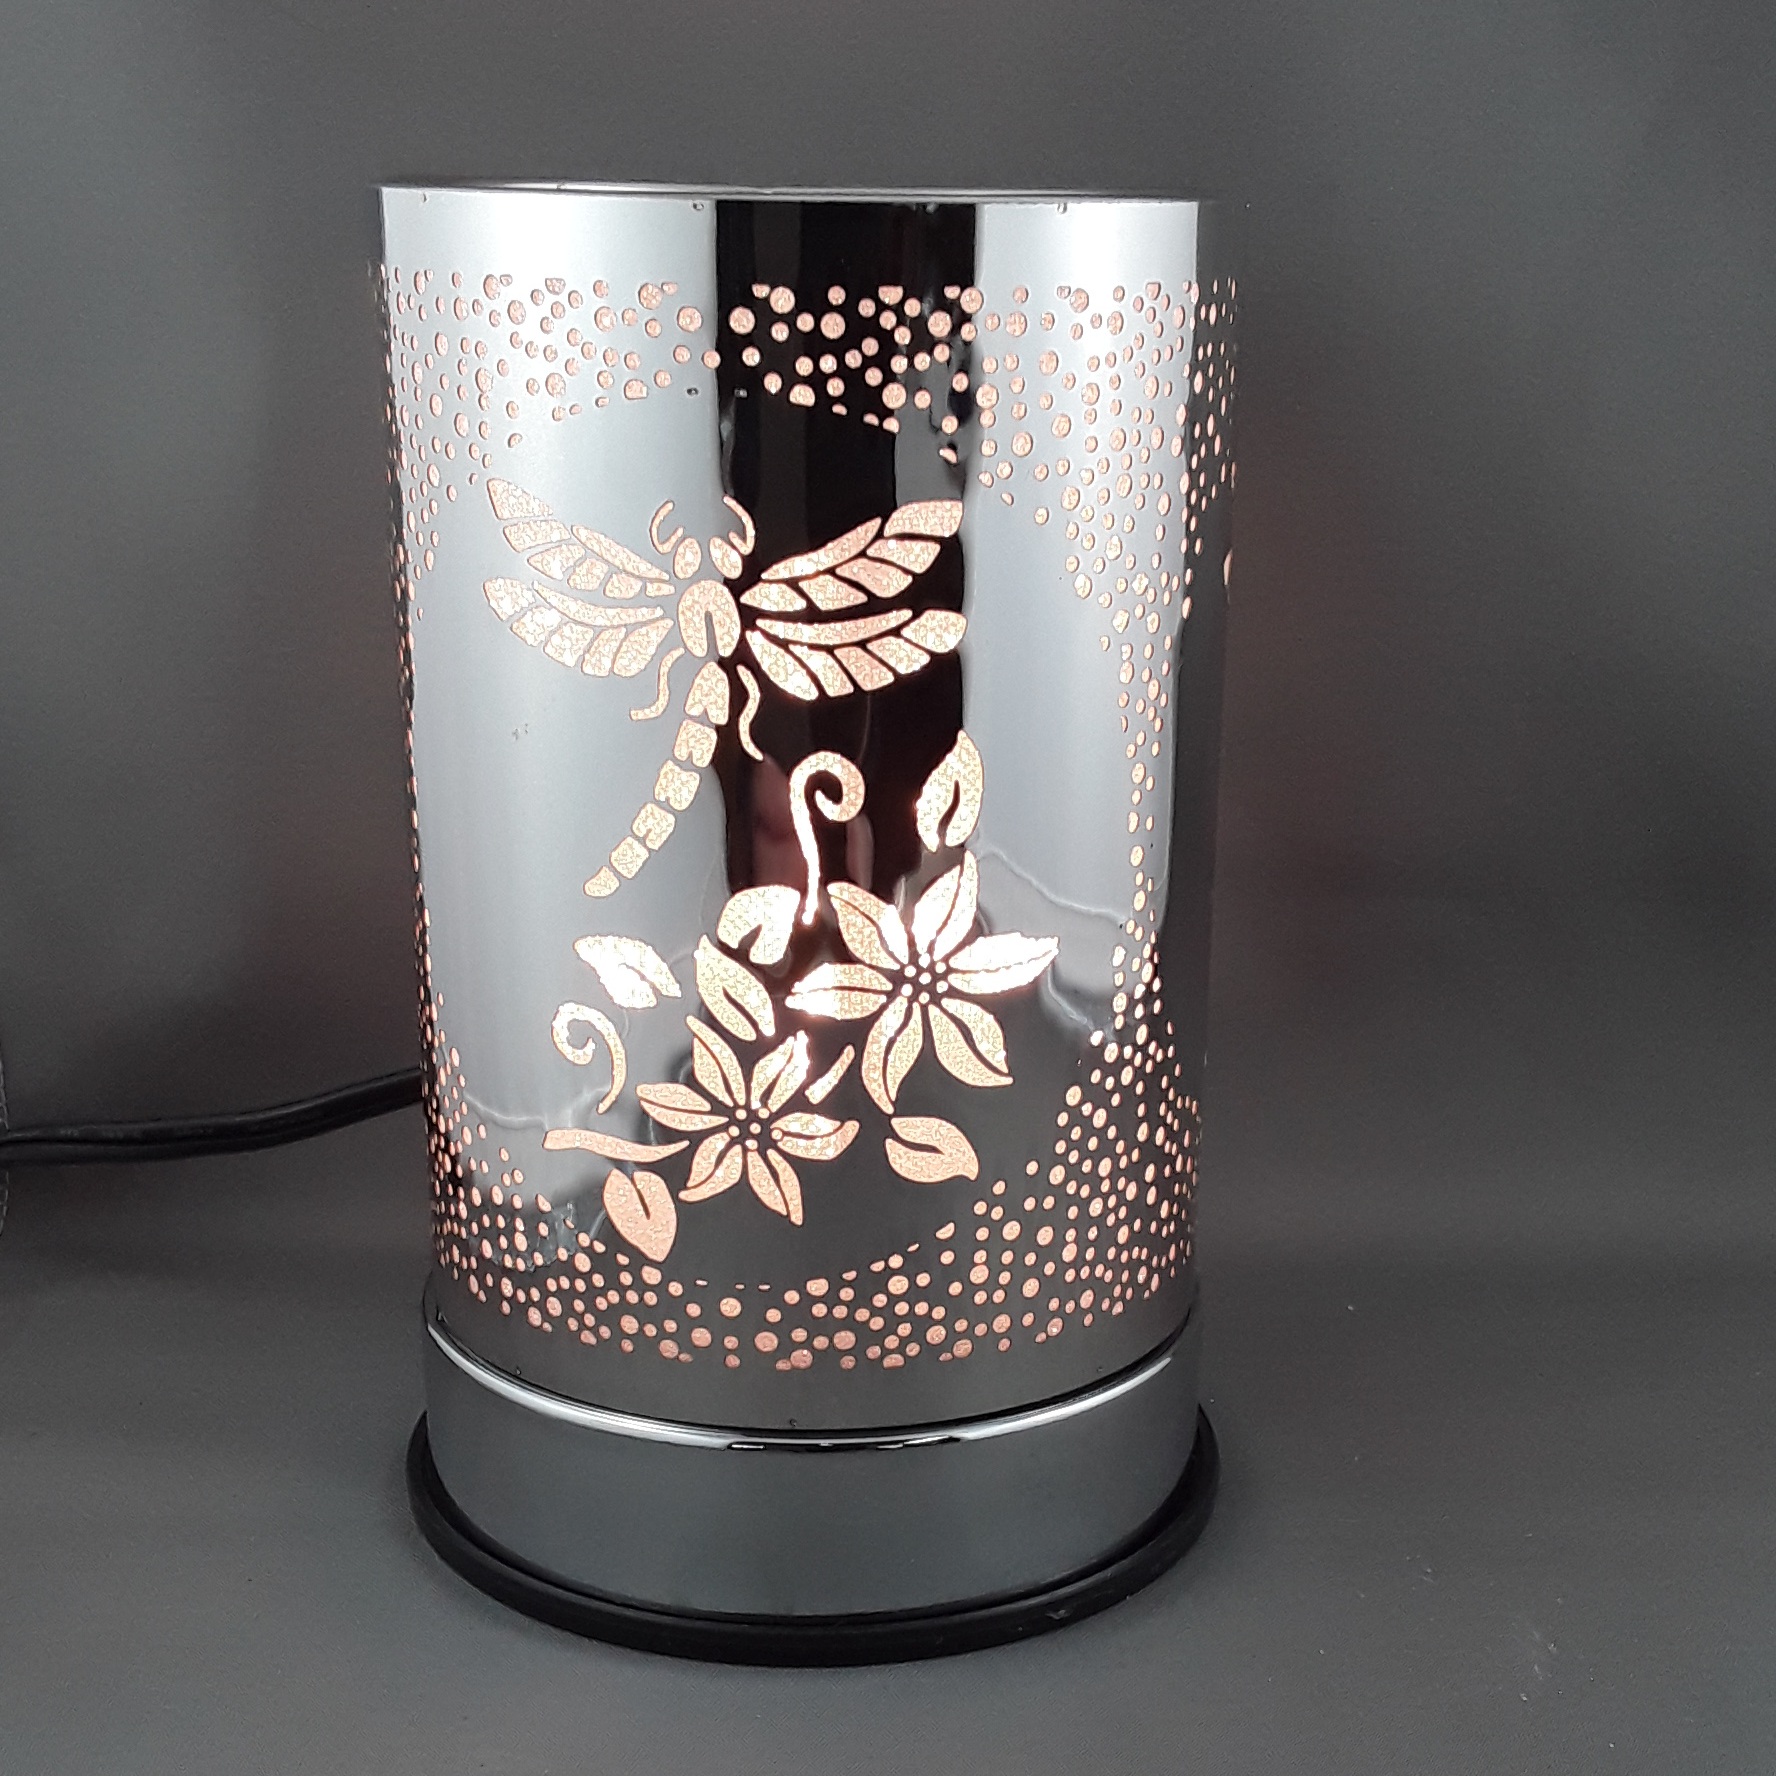 Touch lamp with oil burner | Dragon Fly - Birdie’s Nest Inc 